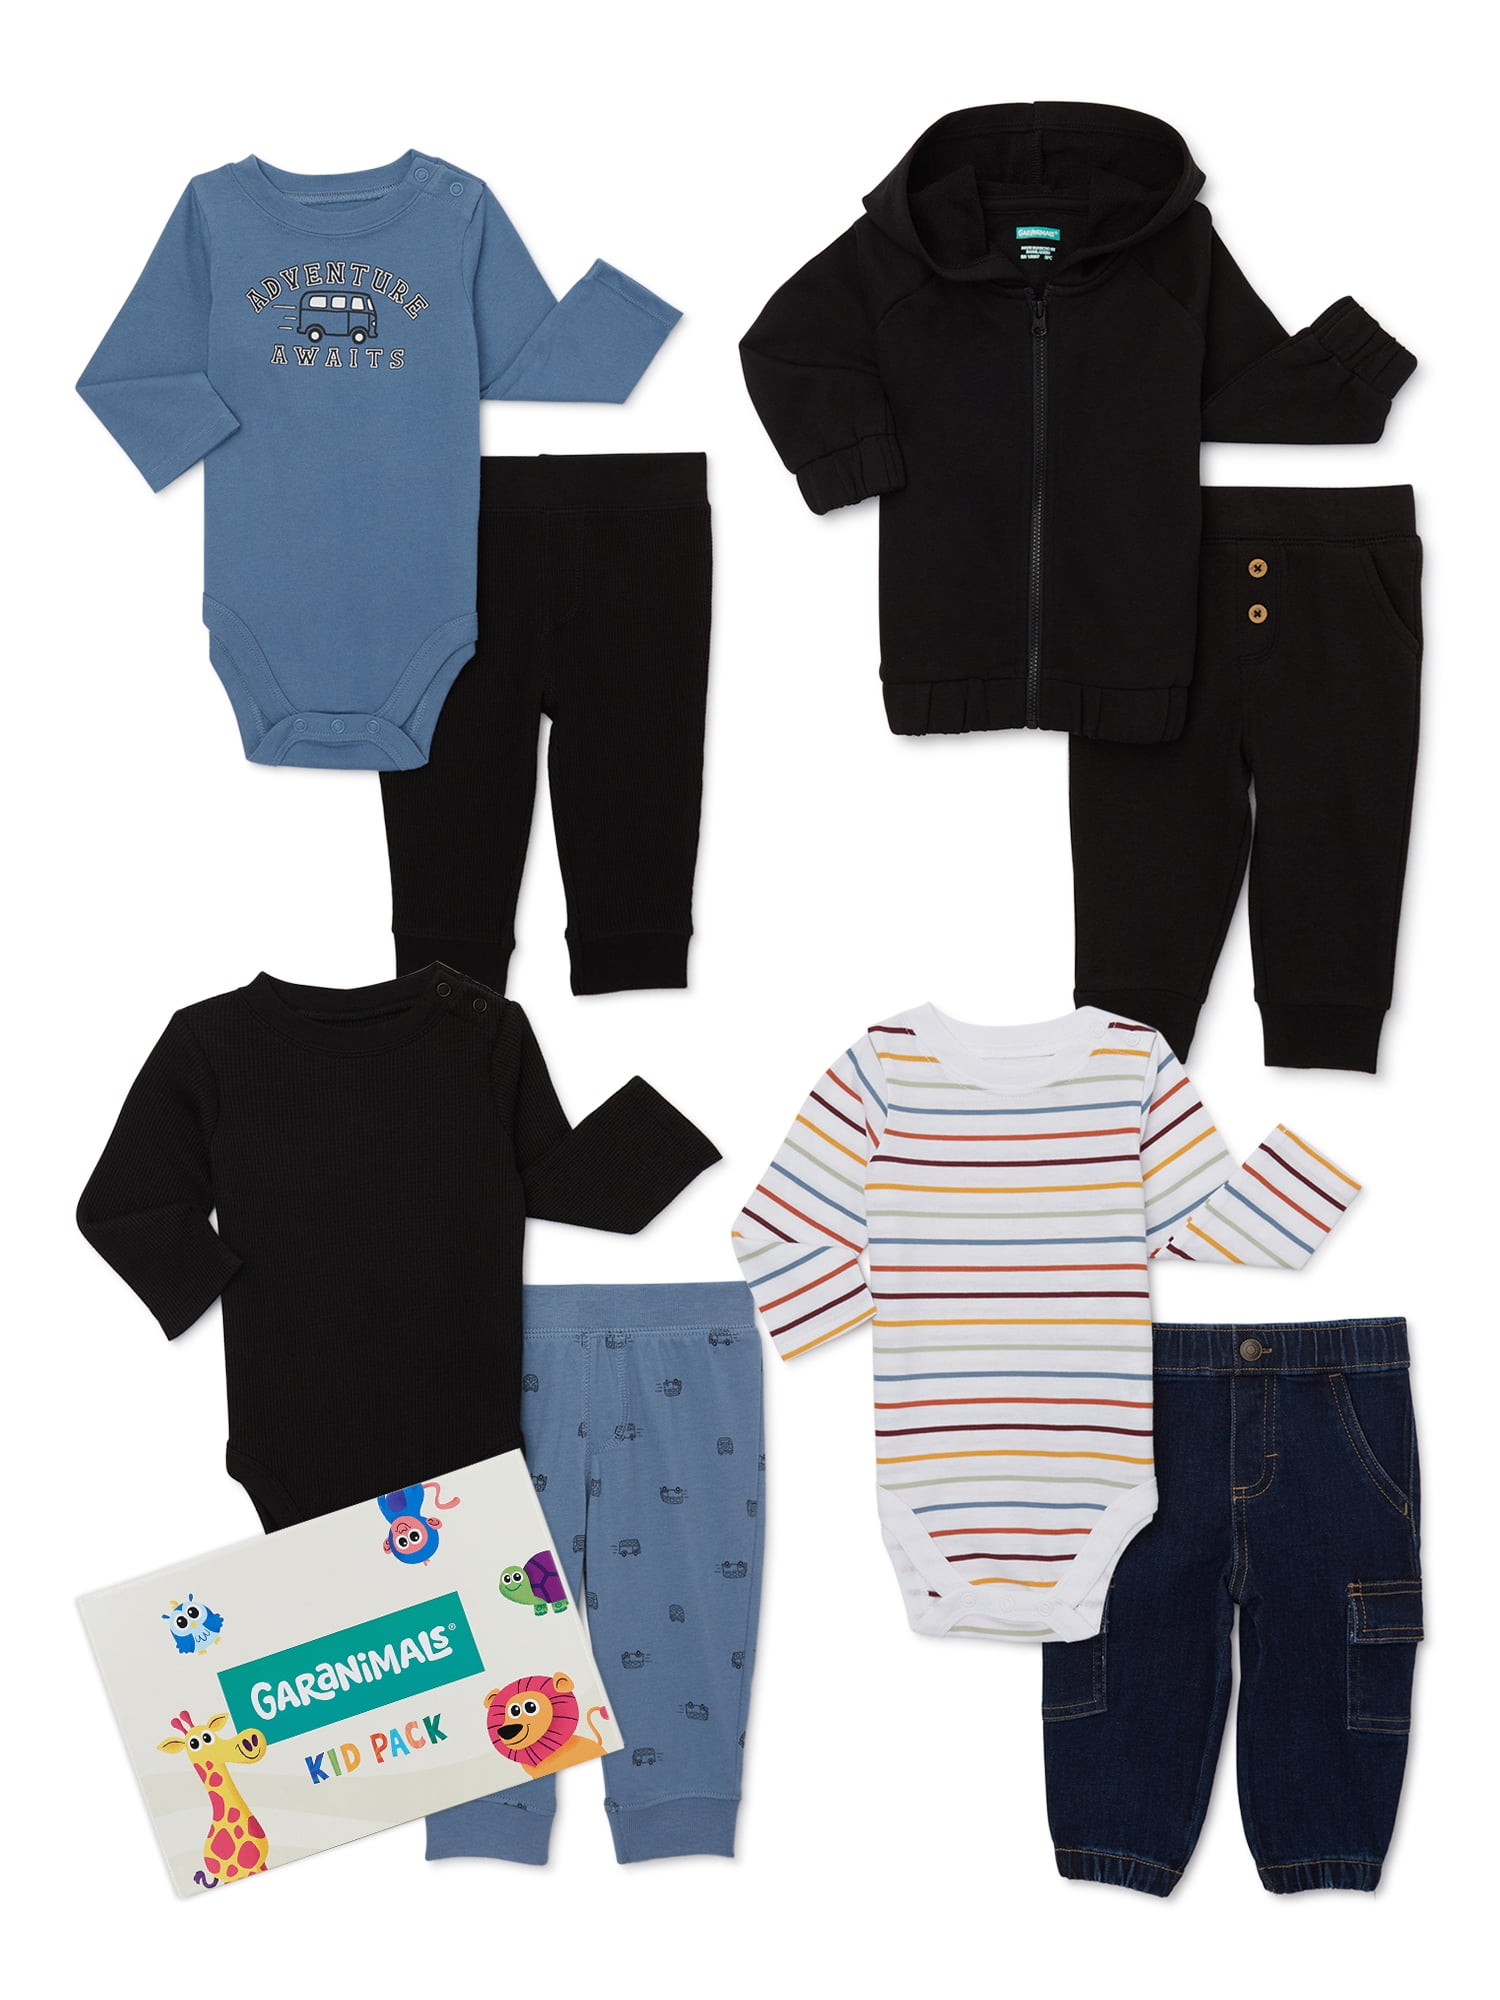 Garanimals Baby Boys Mix and Match Outfits Kid Pack, 10-Piece